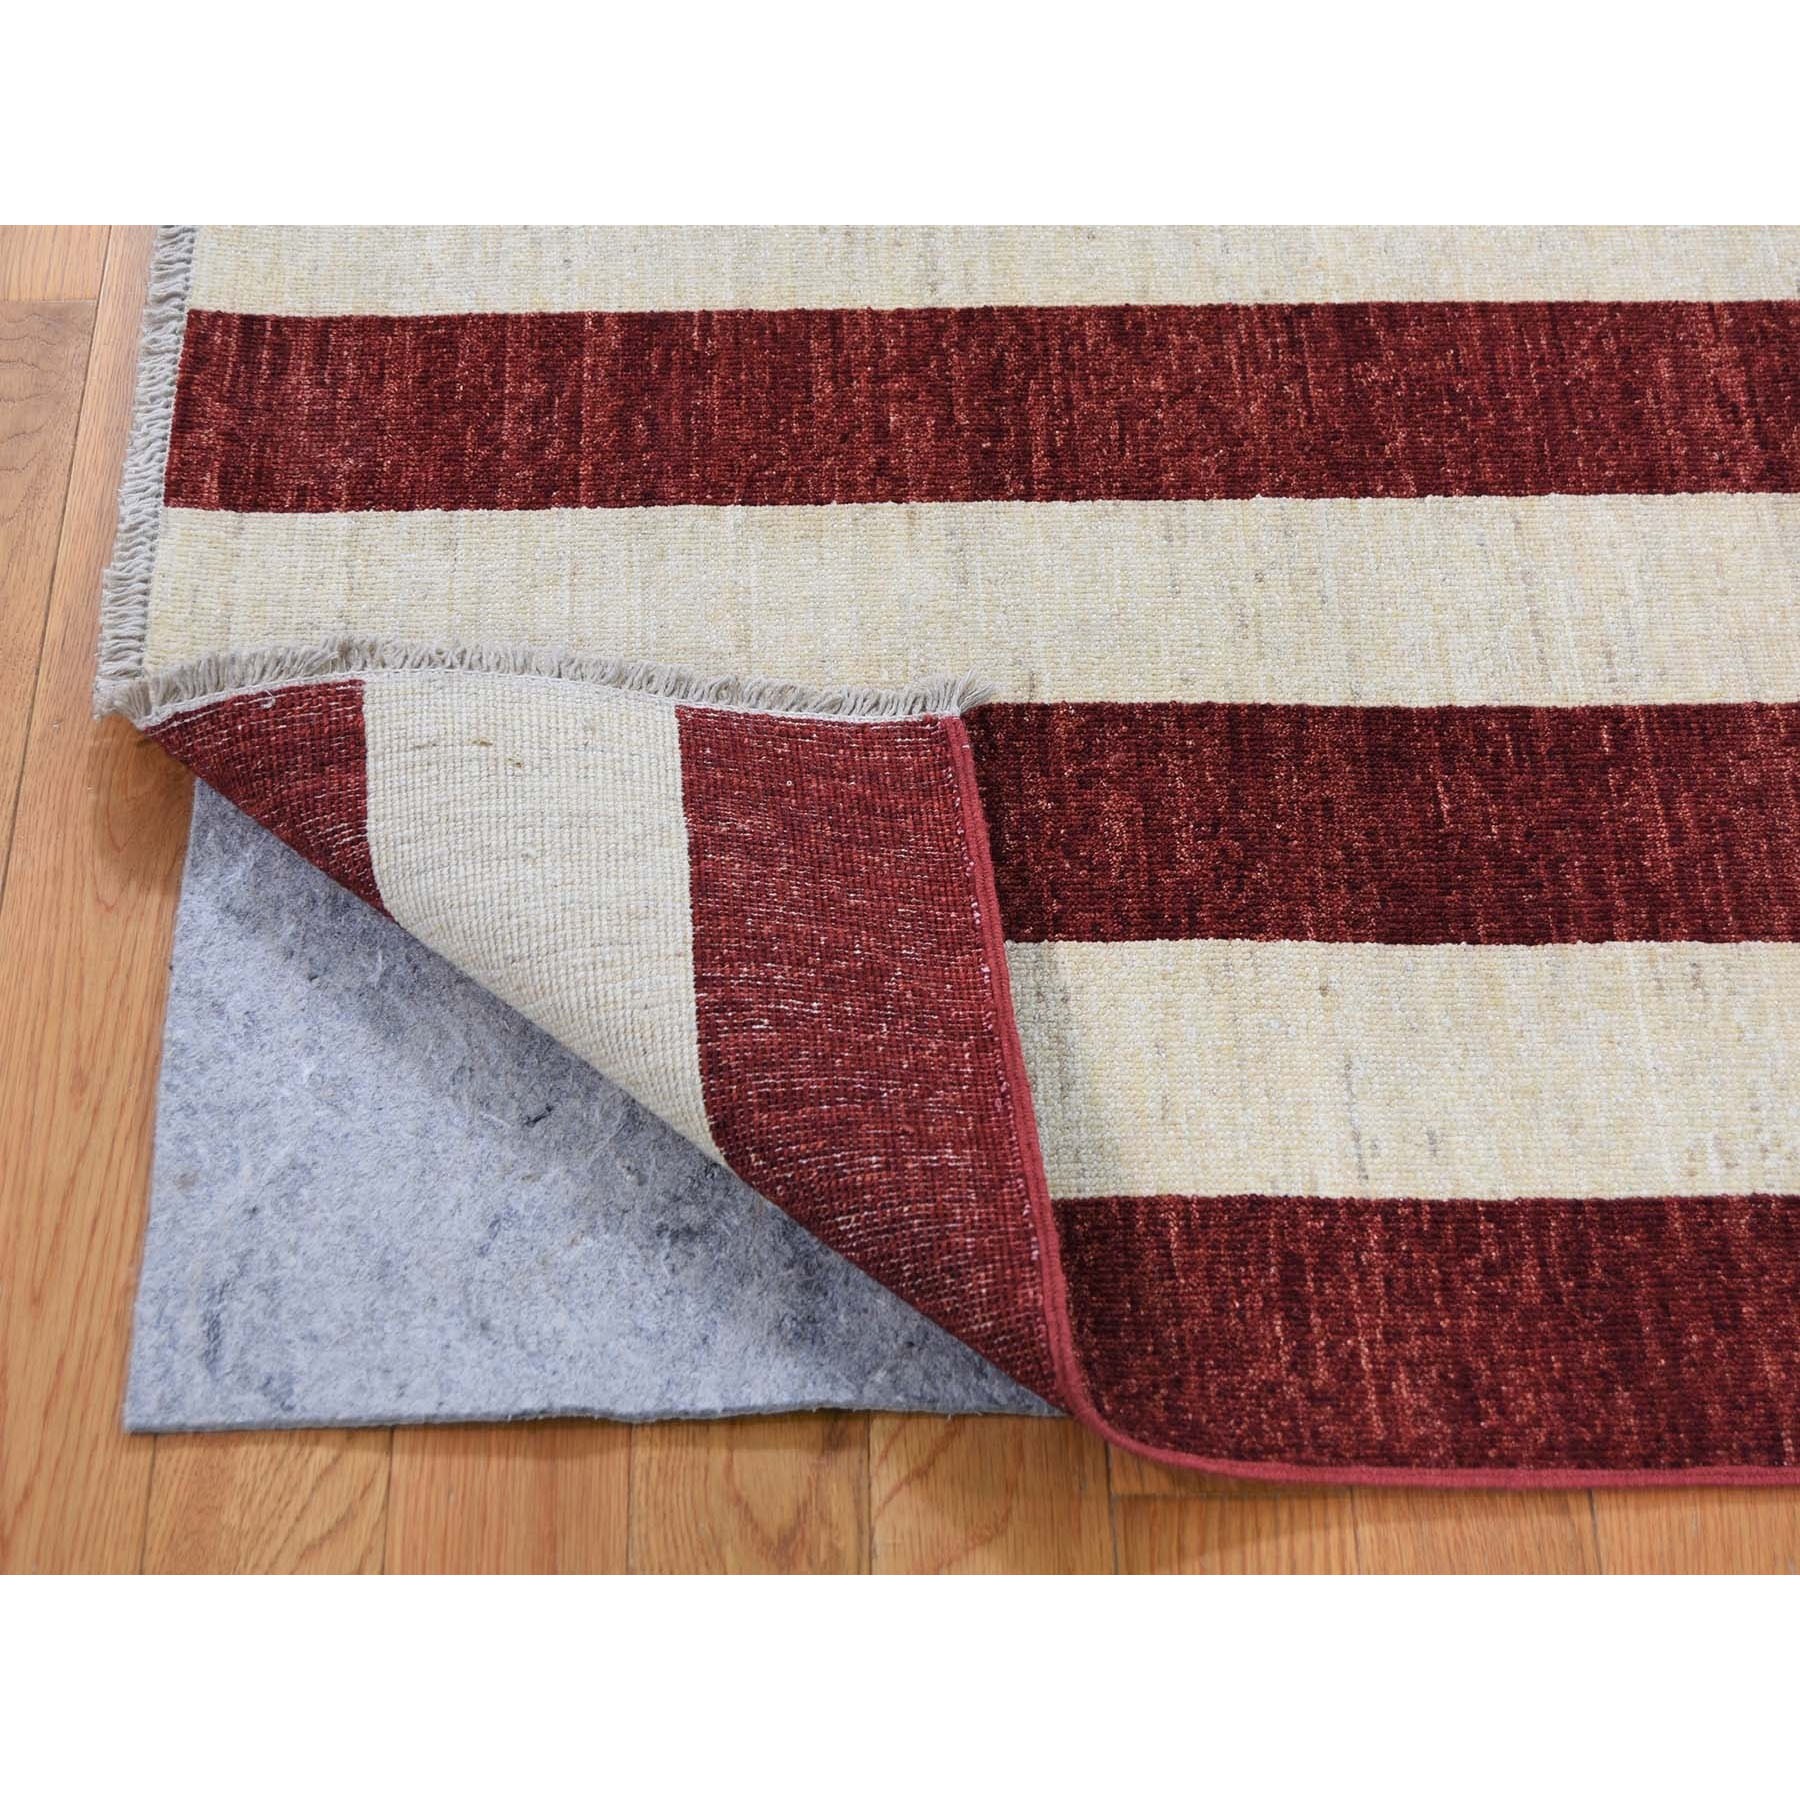 5-x7- Pure Wool Vintage Look American History Hand-Knotted Flag Design Wall Hanging Rug 